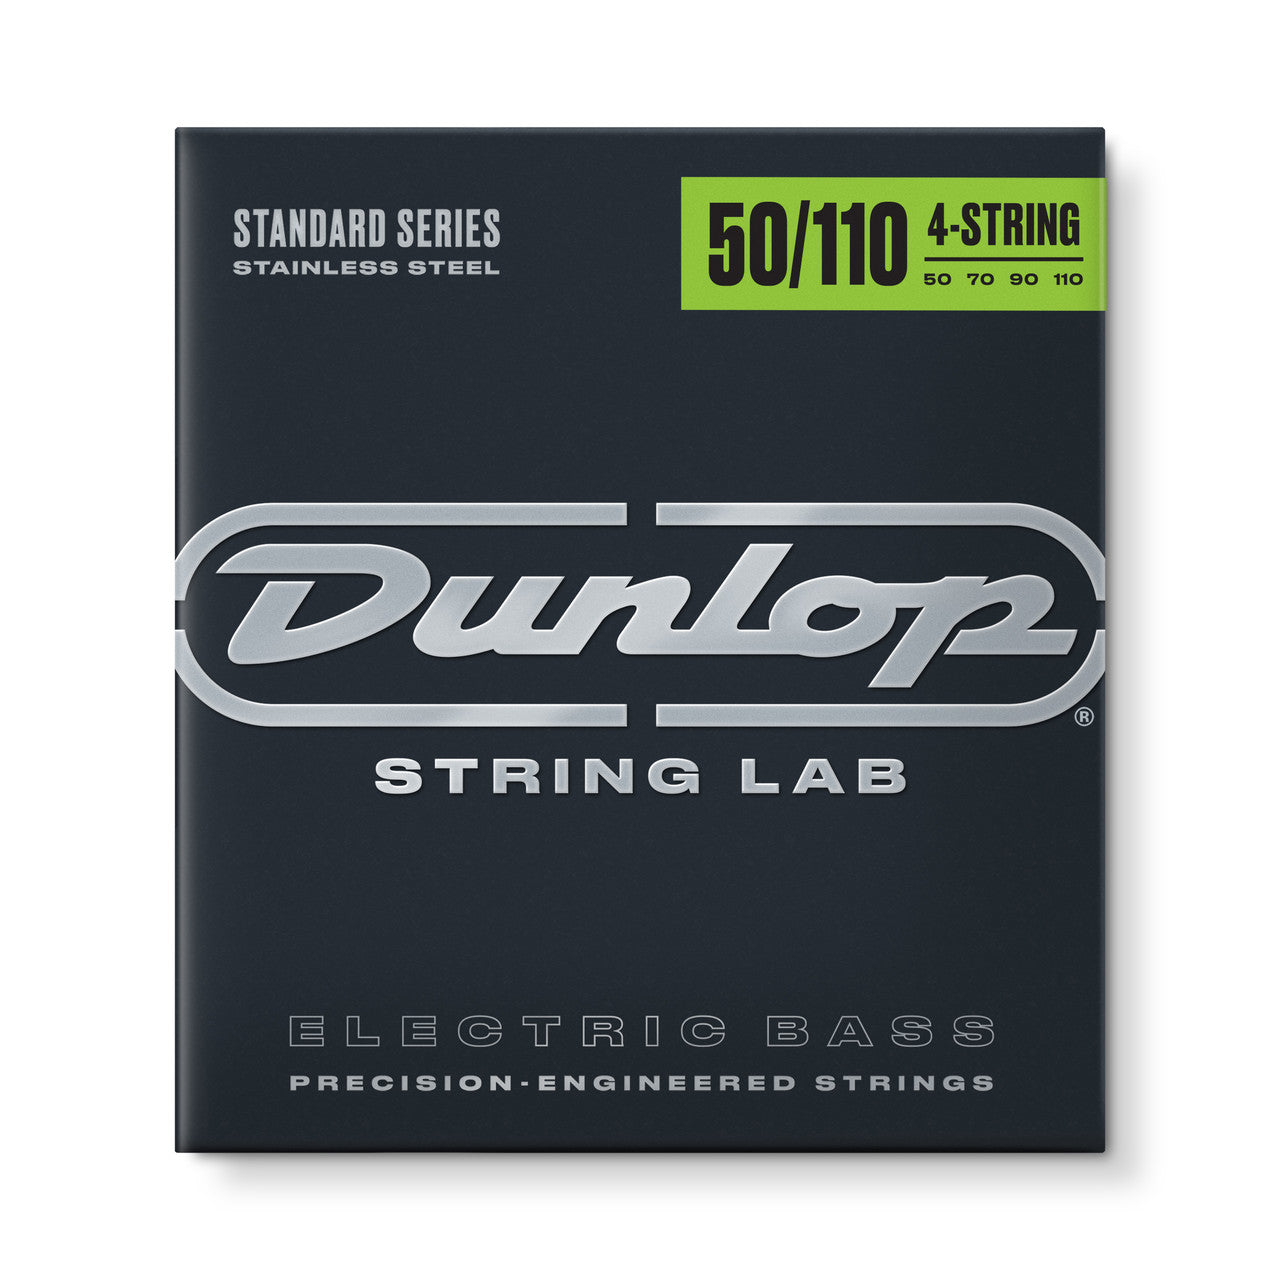 Jim Dunlop Dunlop Stainless Steel Electric Bass Strings Long Scale Set - 4-String 50-110 DBS50110